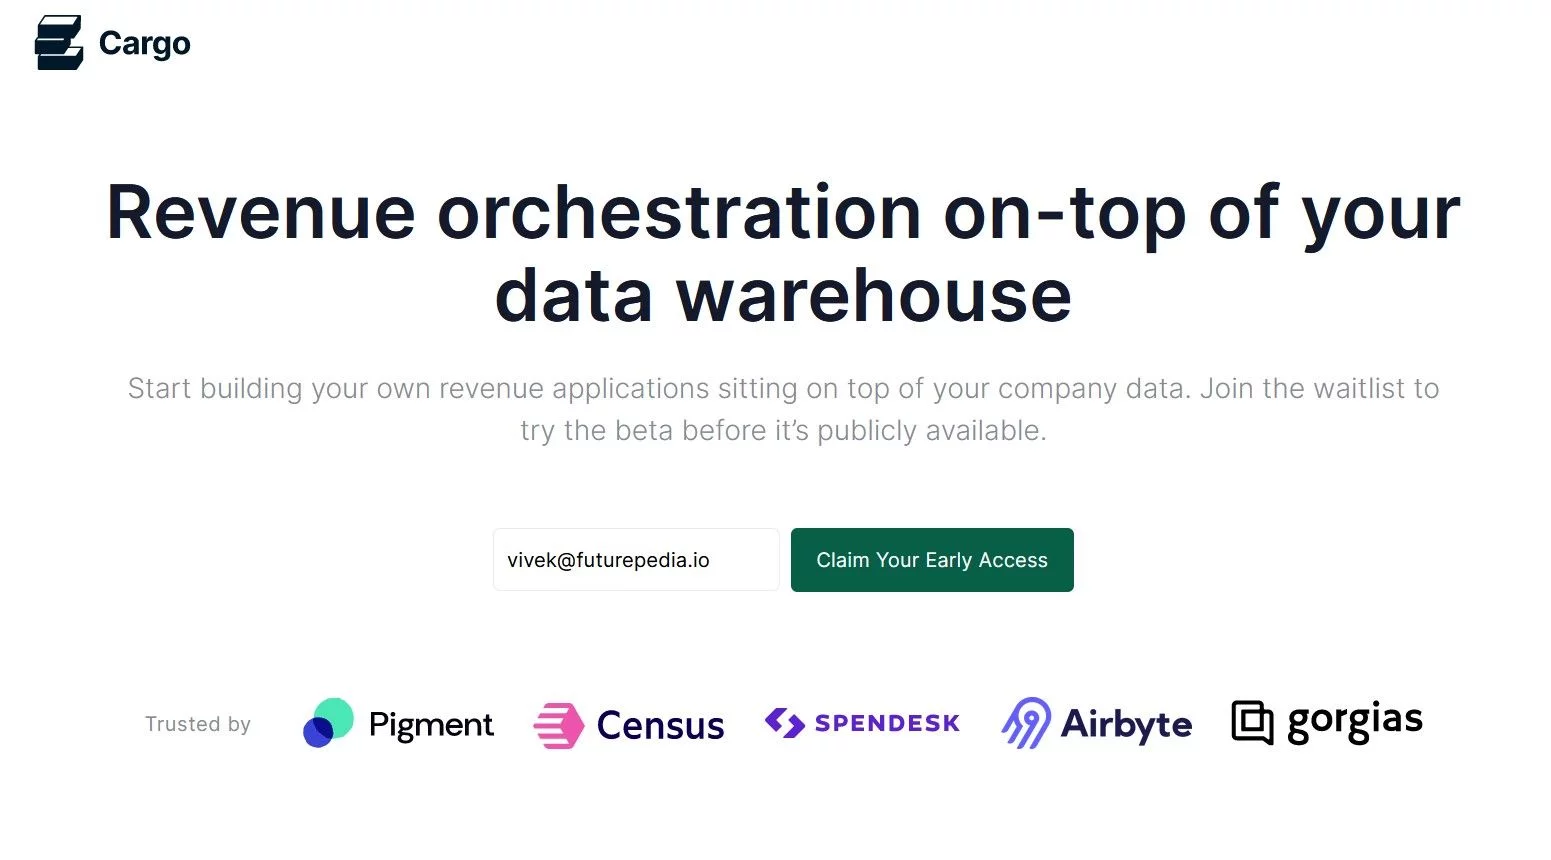  Revenue orchestration on-top of your data